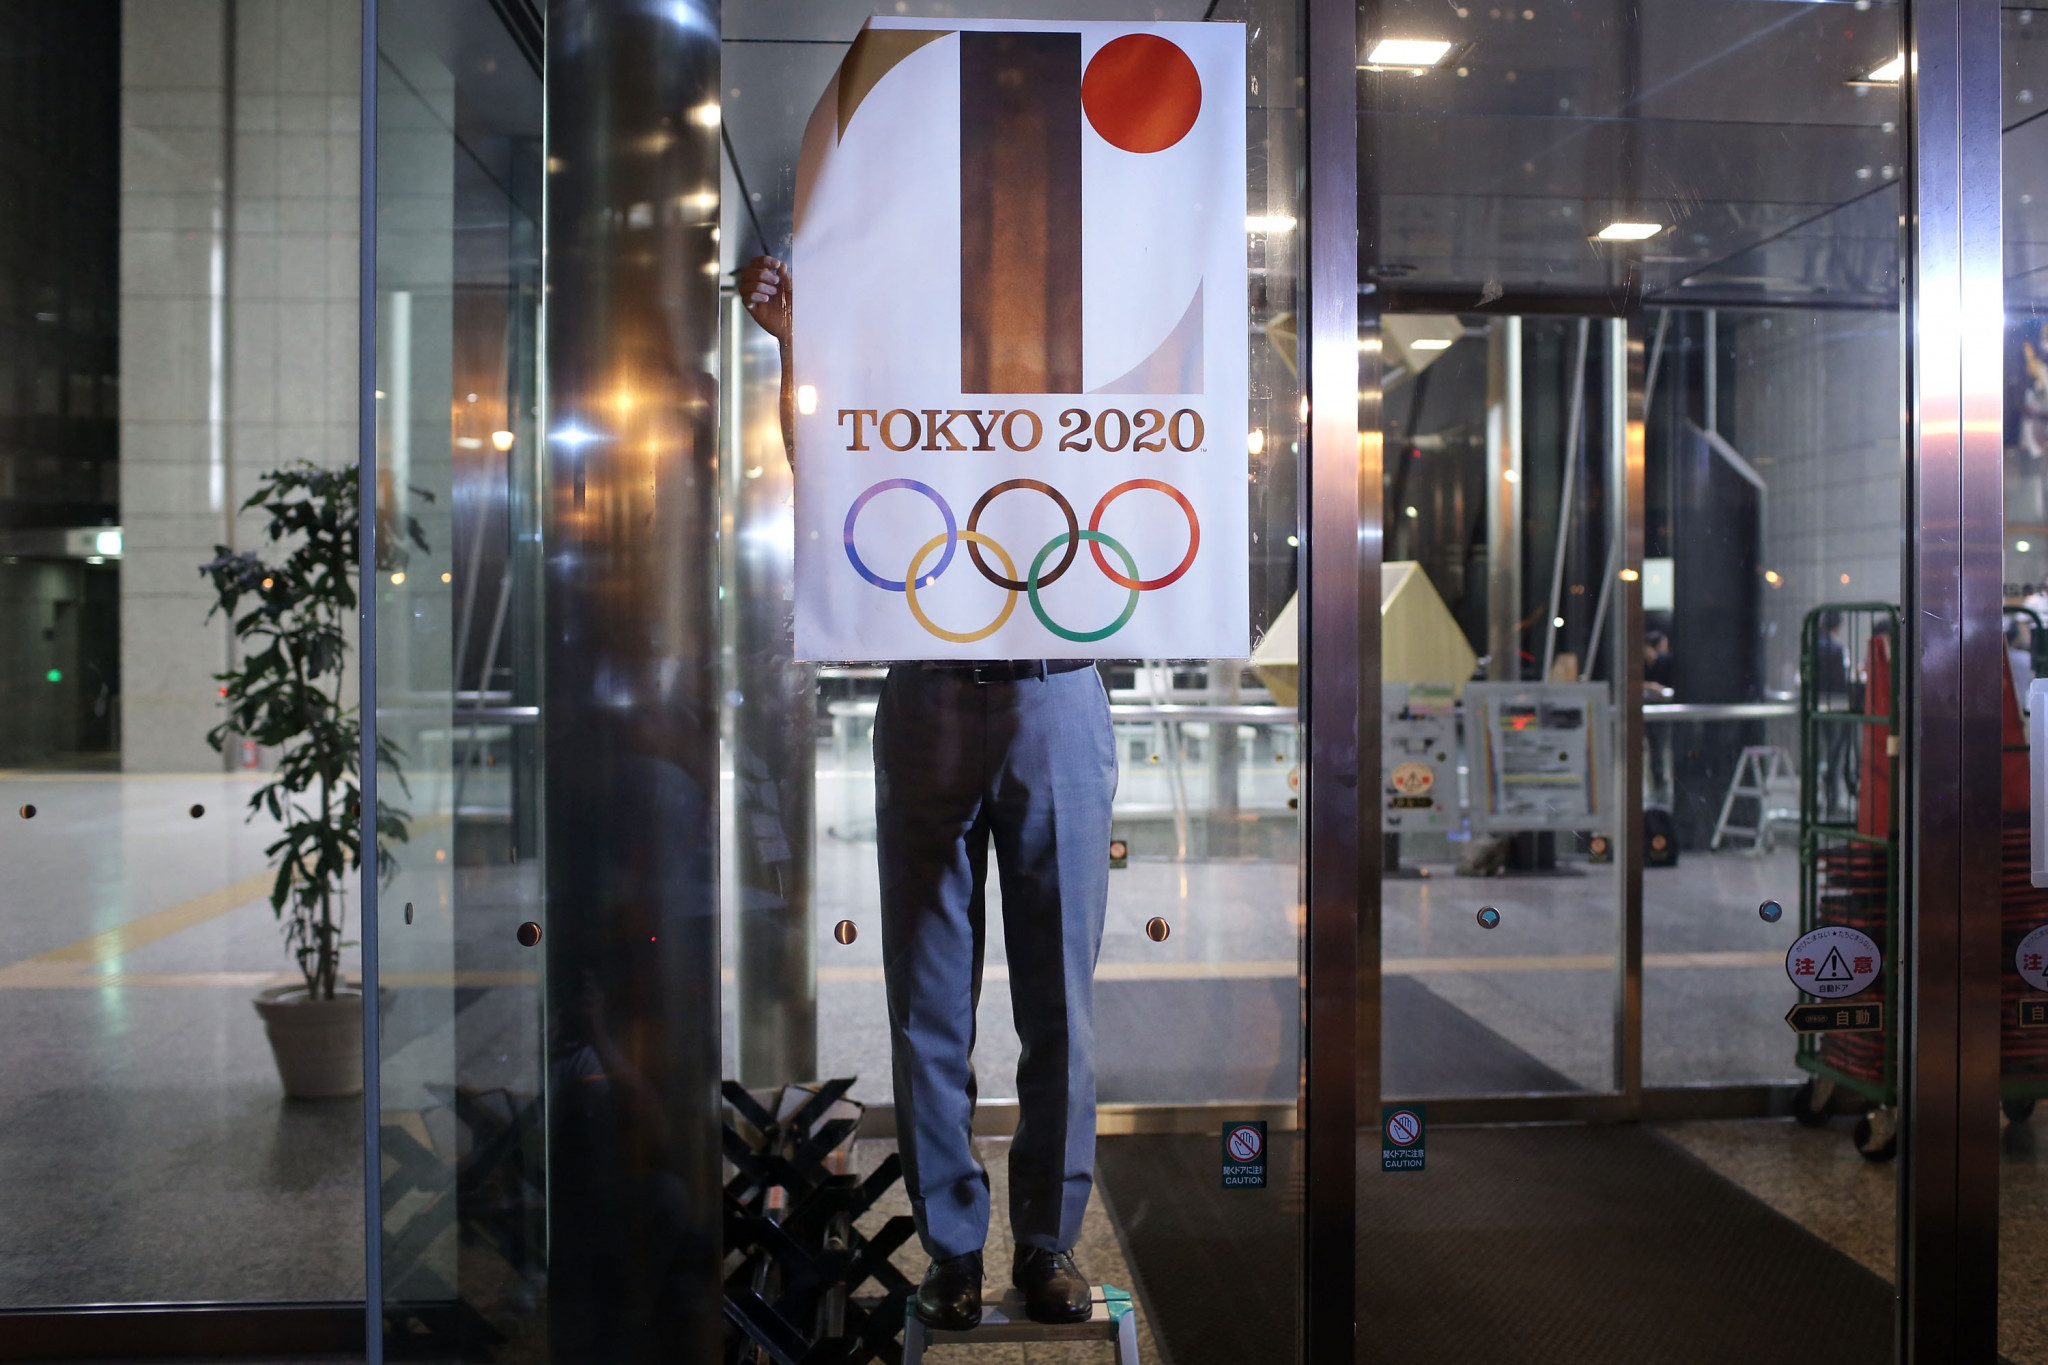 A poster showing the short-lived Tokyo 2020 emblem is taken down ©Getty Images